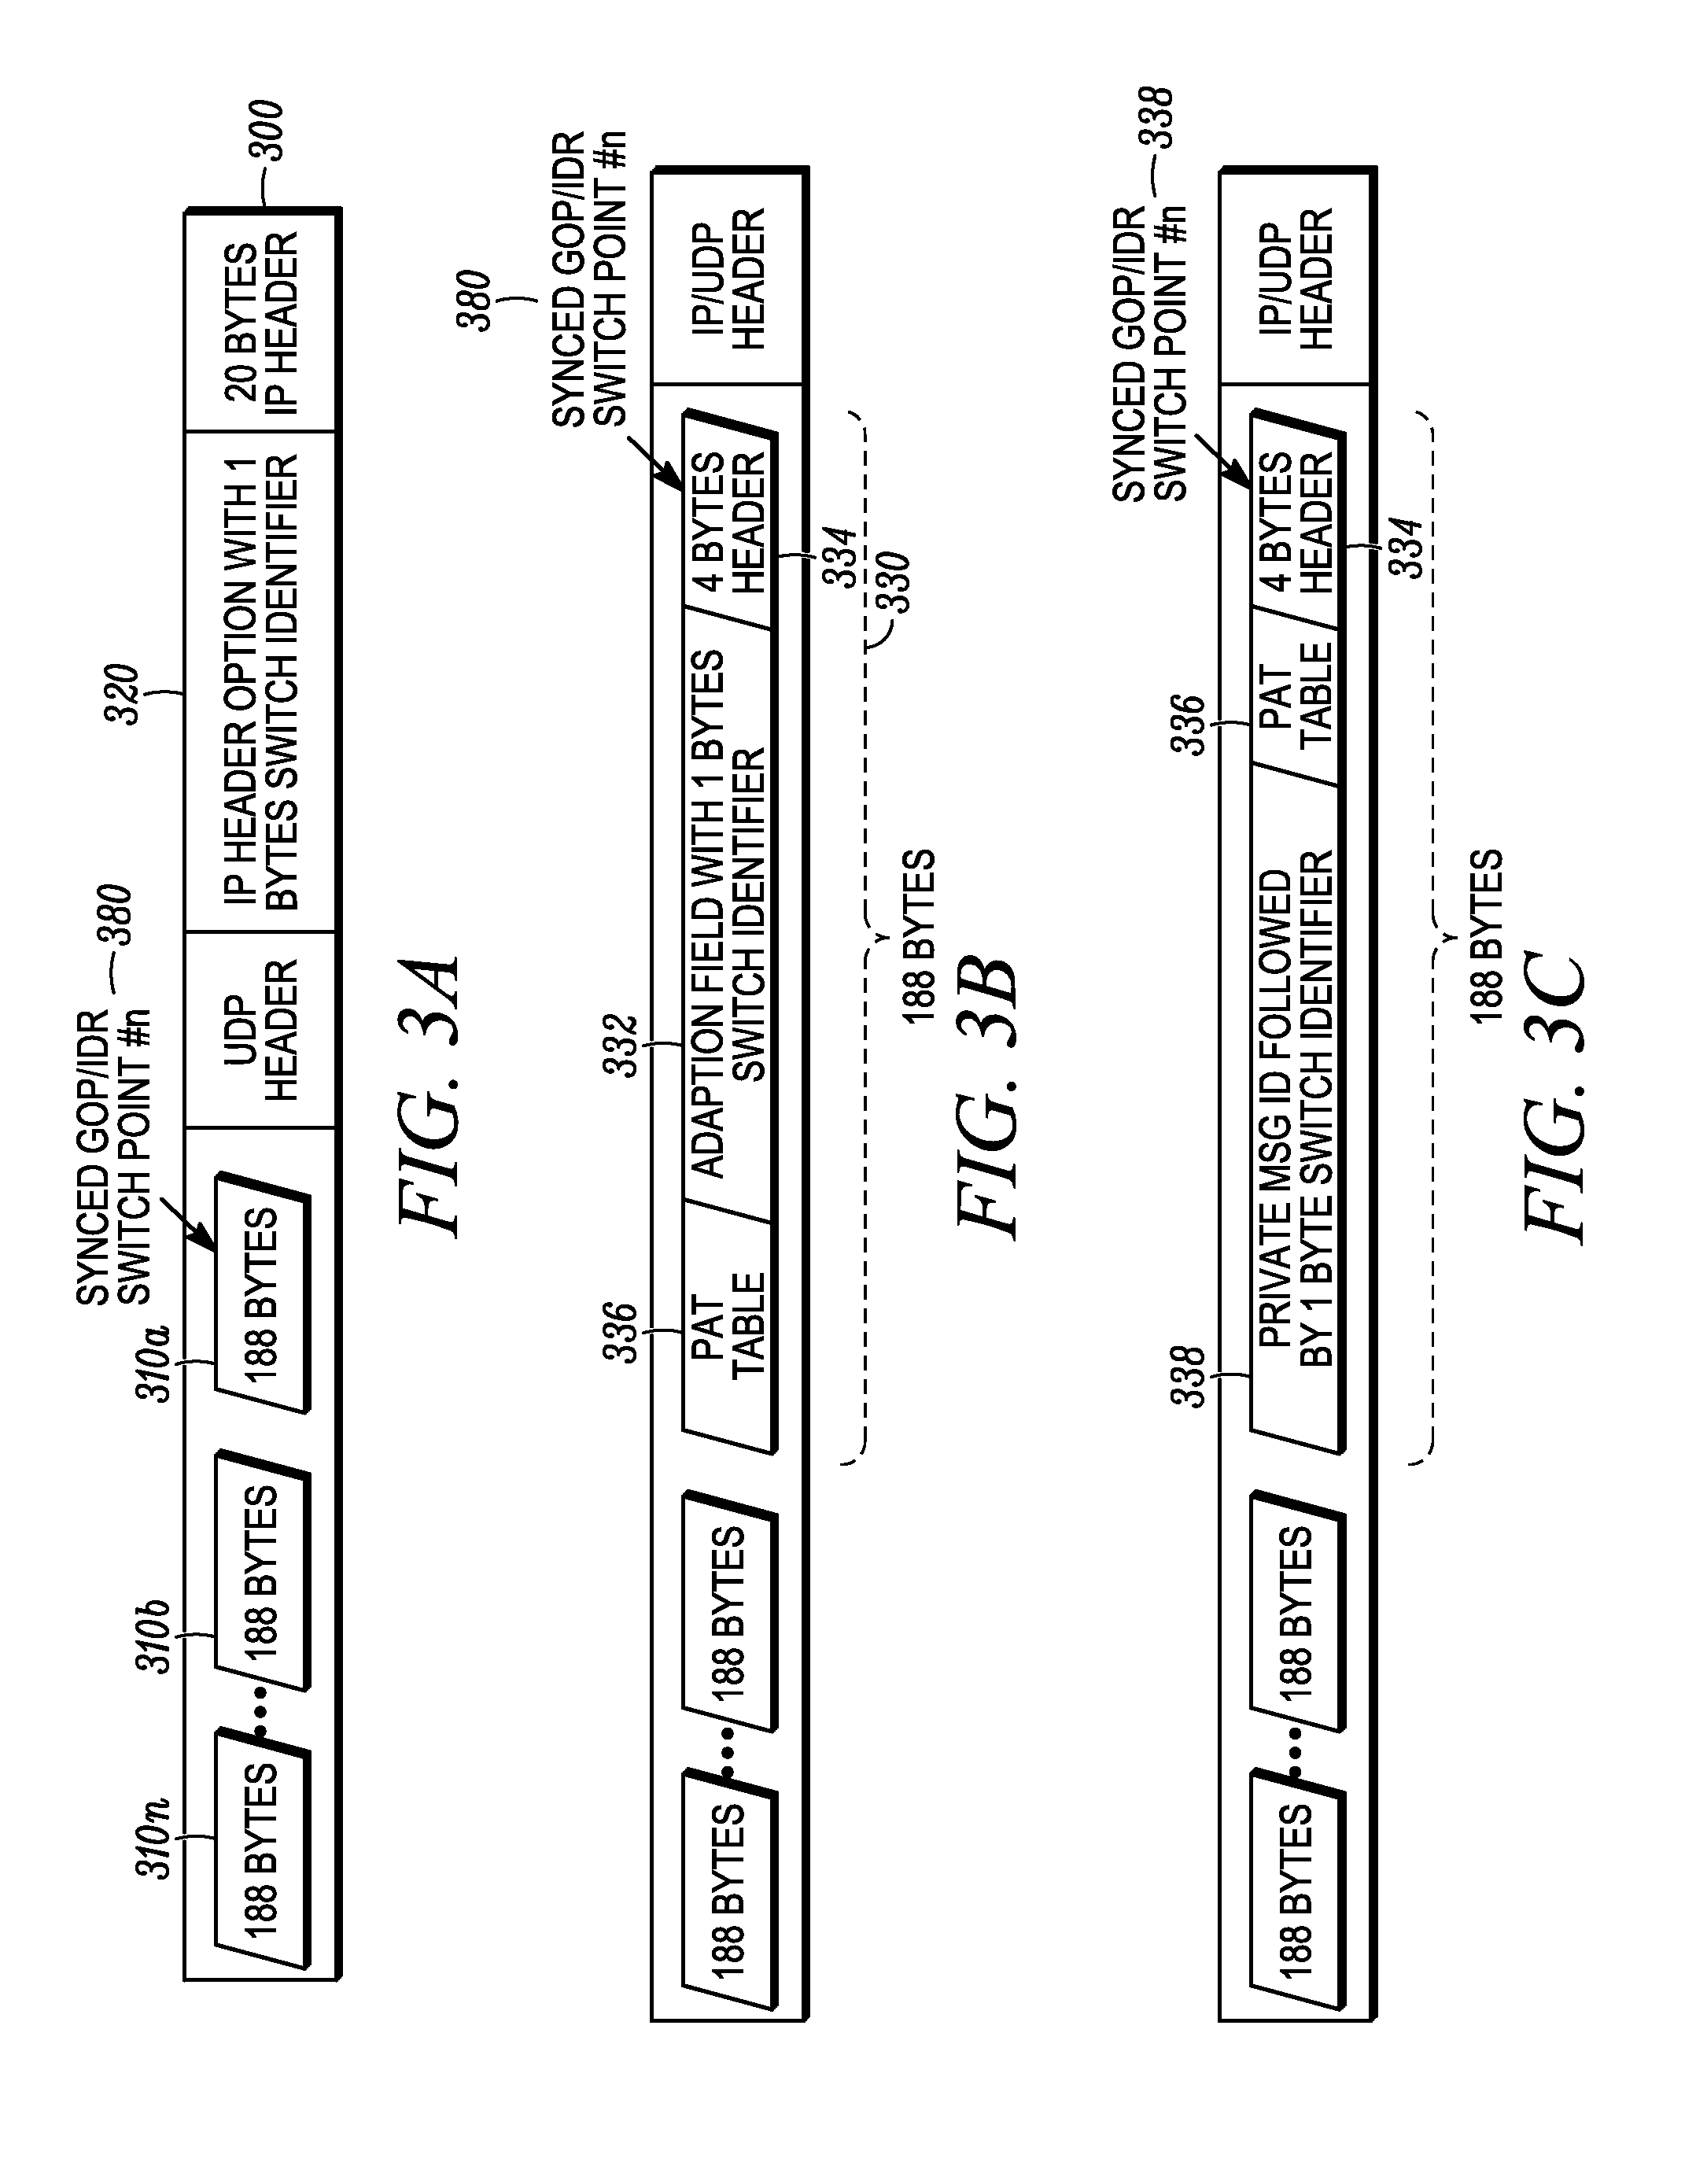 Devices, systems, and methods for adaptive switching of multicast content delivery to optimize bandwidth usage